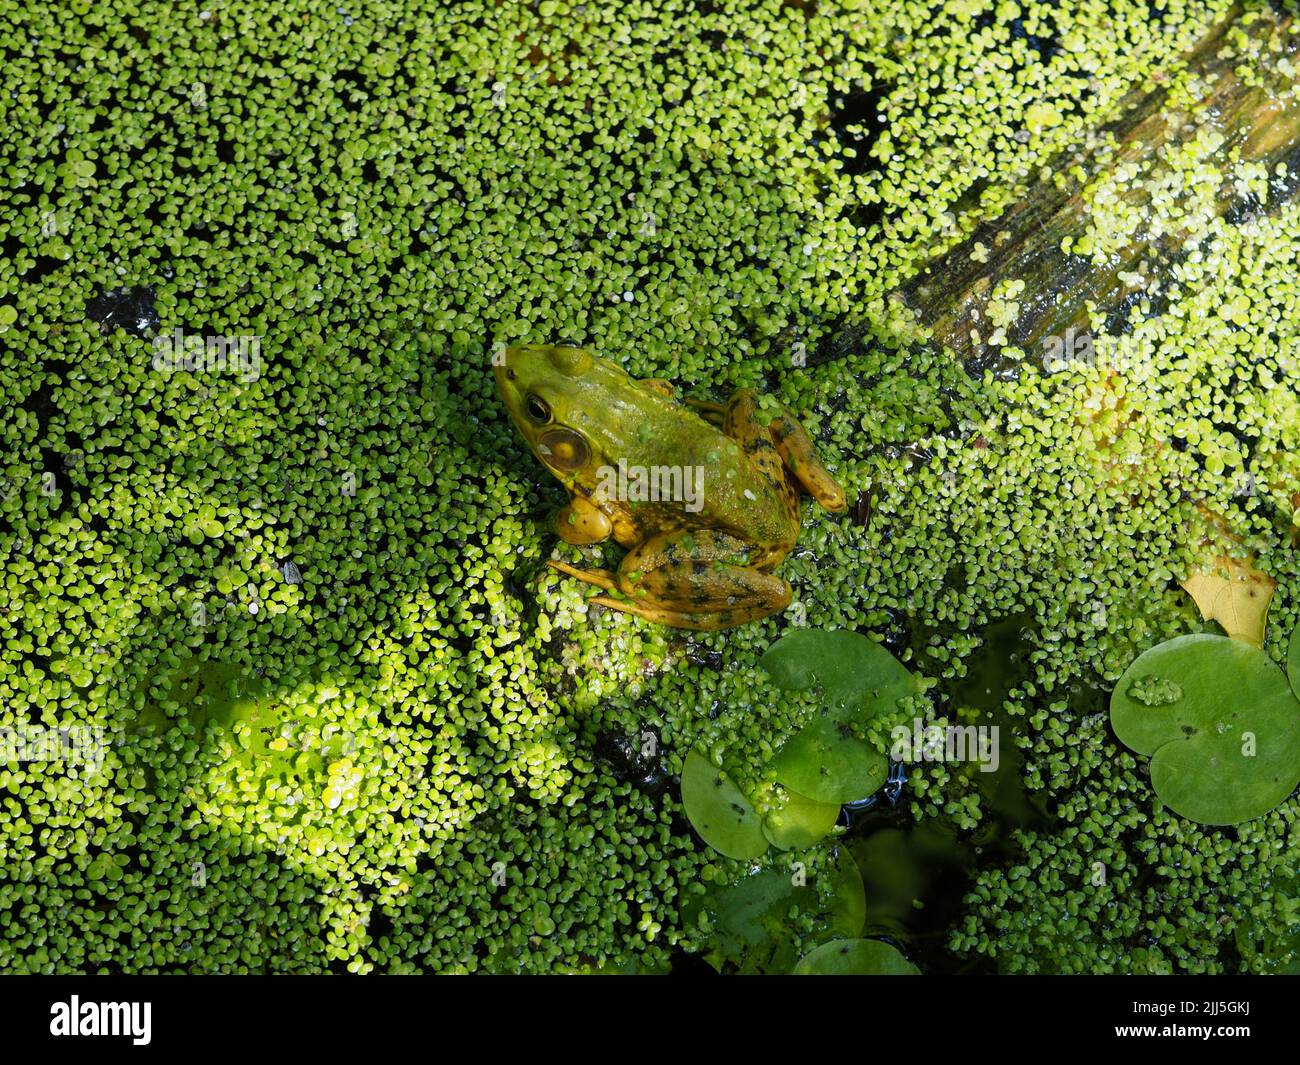 Green frog (Lithobates clamitans) camouflaged among the duckweed in a pond in Ottawa, Ontario, Canada. Stock Photo